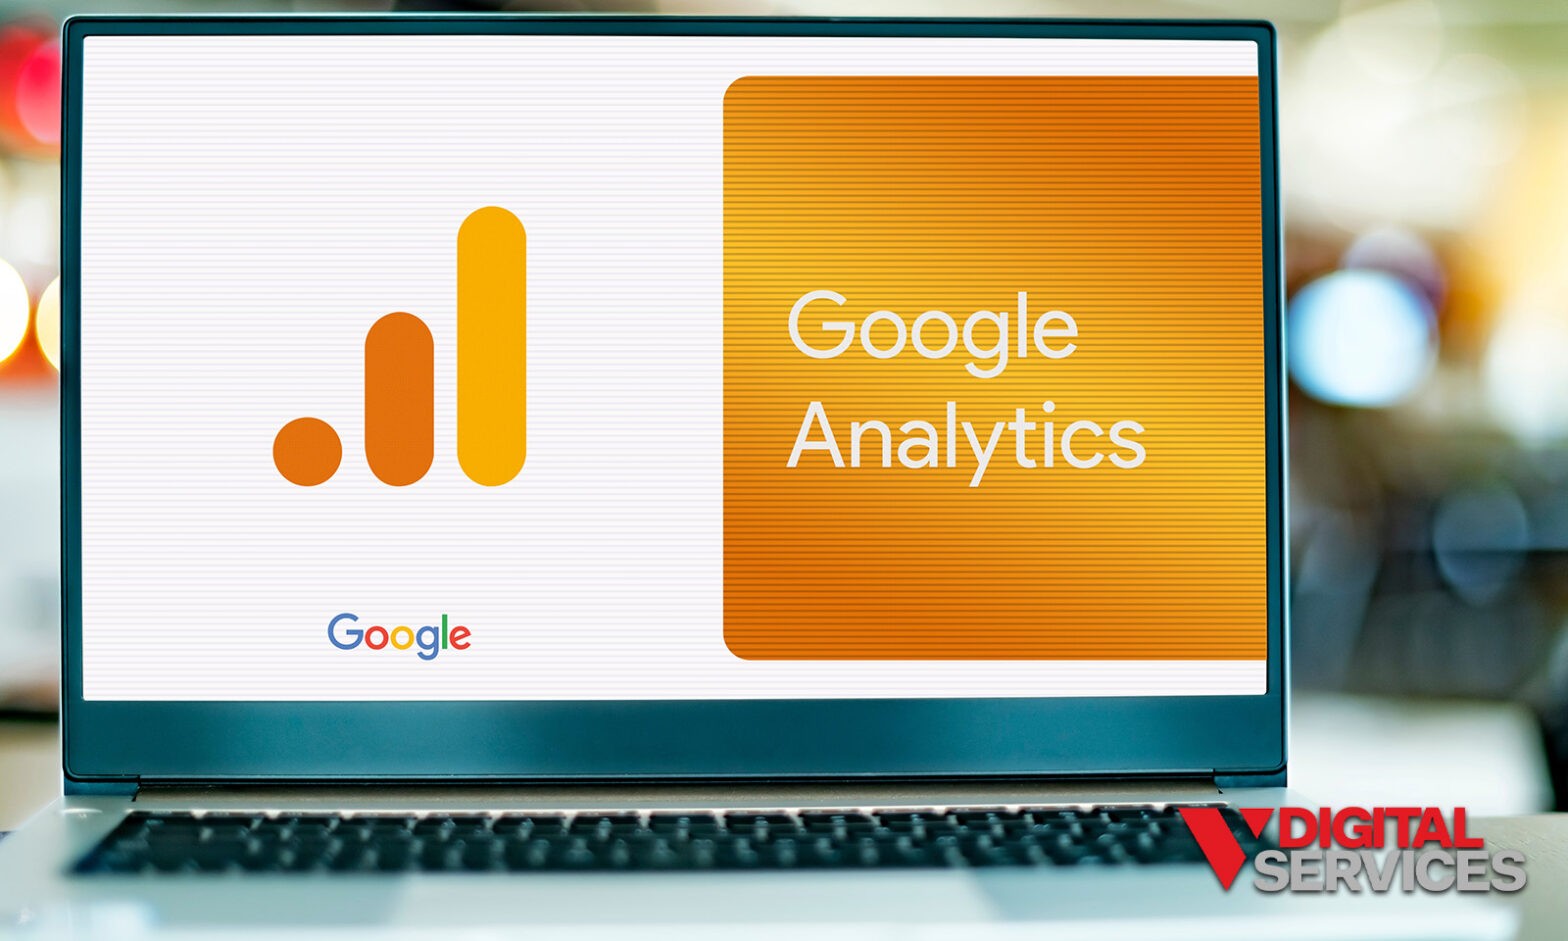 What is new and better about Google Analytics 4